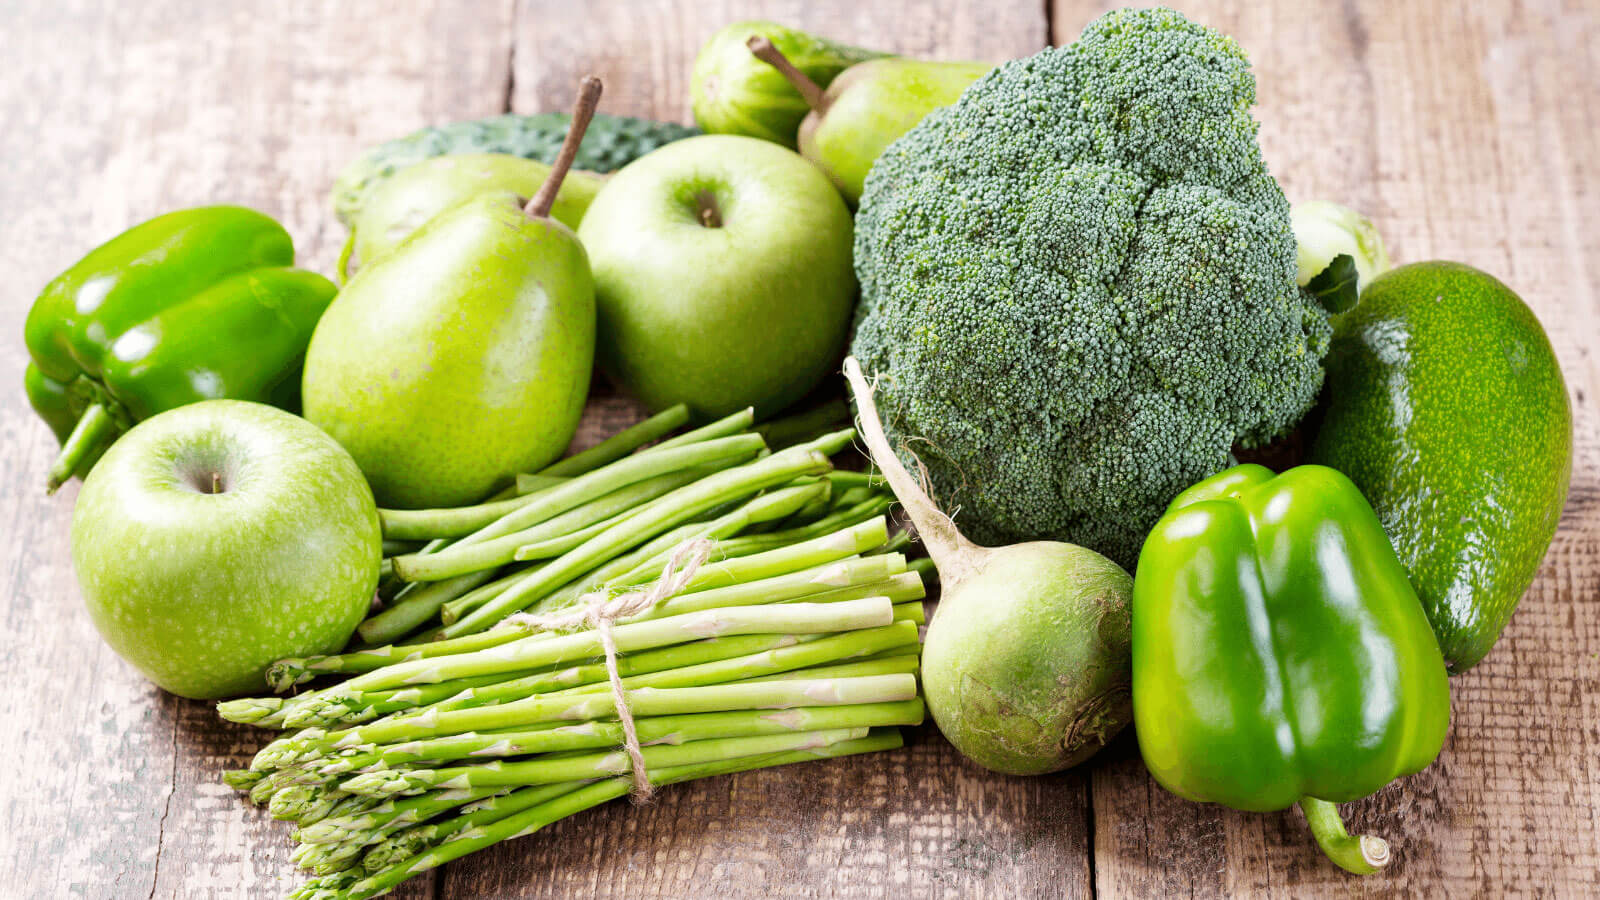 variety of green fruit and veggies